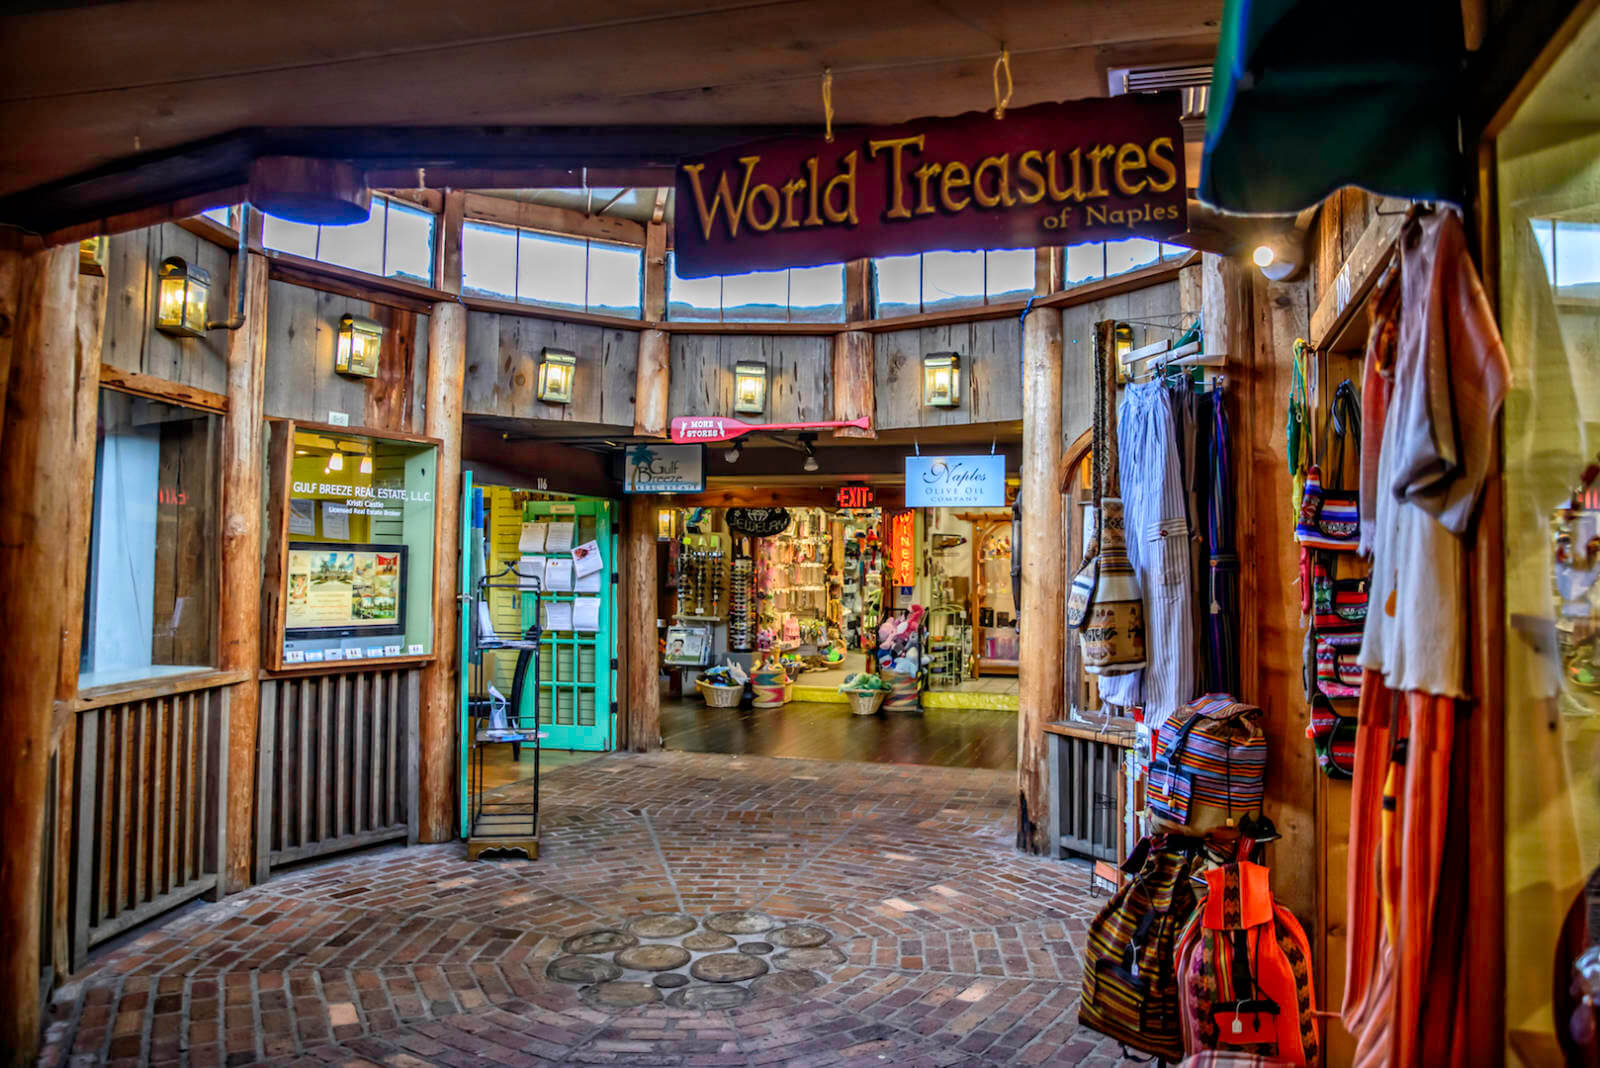 The converted fishing hub Tin City is a great stop on a rainy day. Walk through the maze of 30 shops, restaurants, and attractions. All the shops are locally owned and stock unique souvenirs and treasures. Photo by Jennifer Brinkman. | MustDo.com